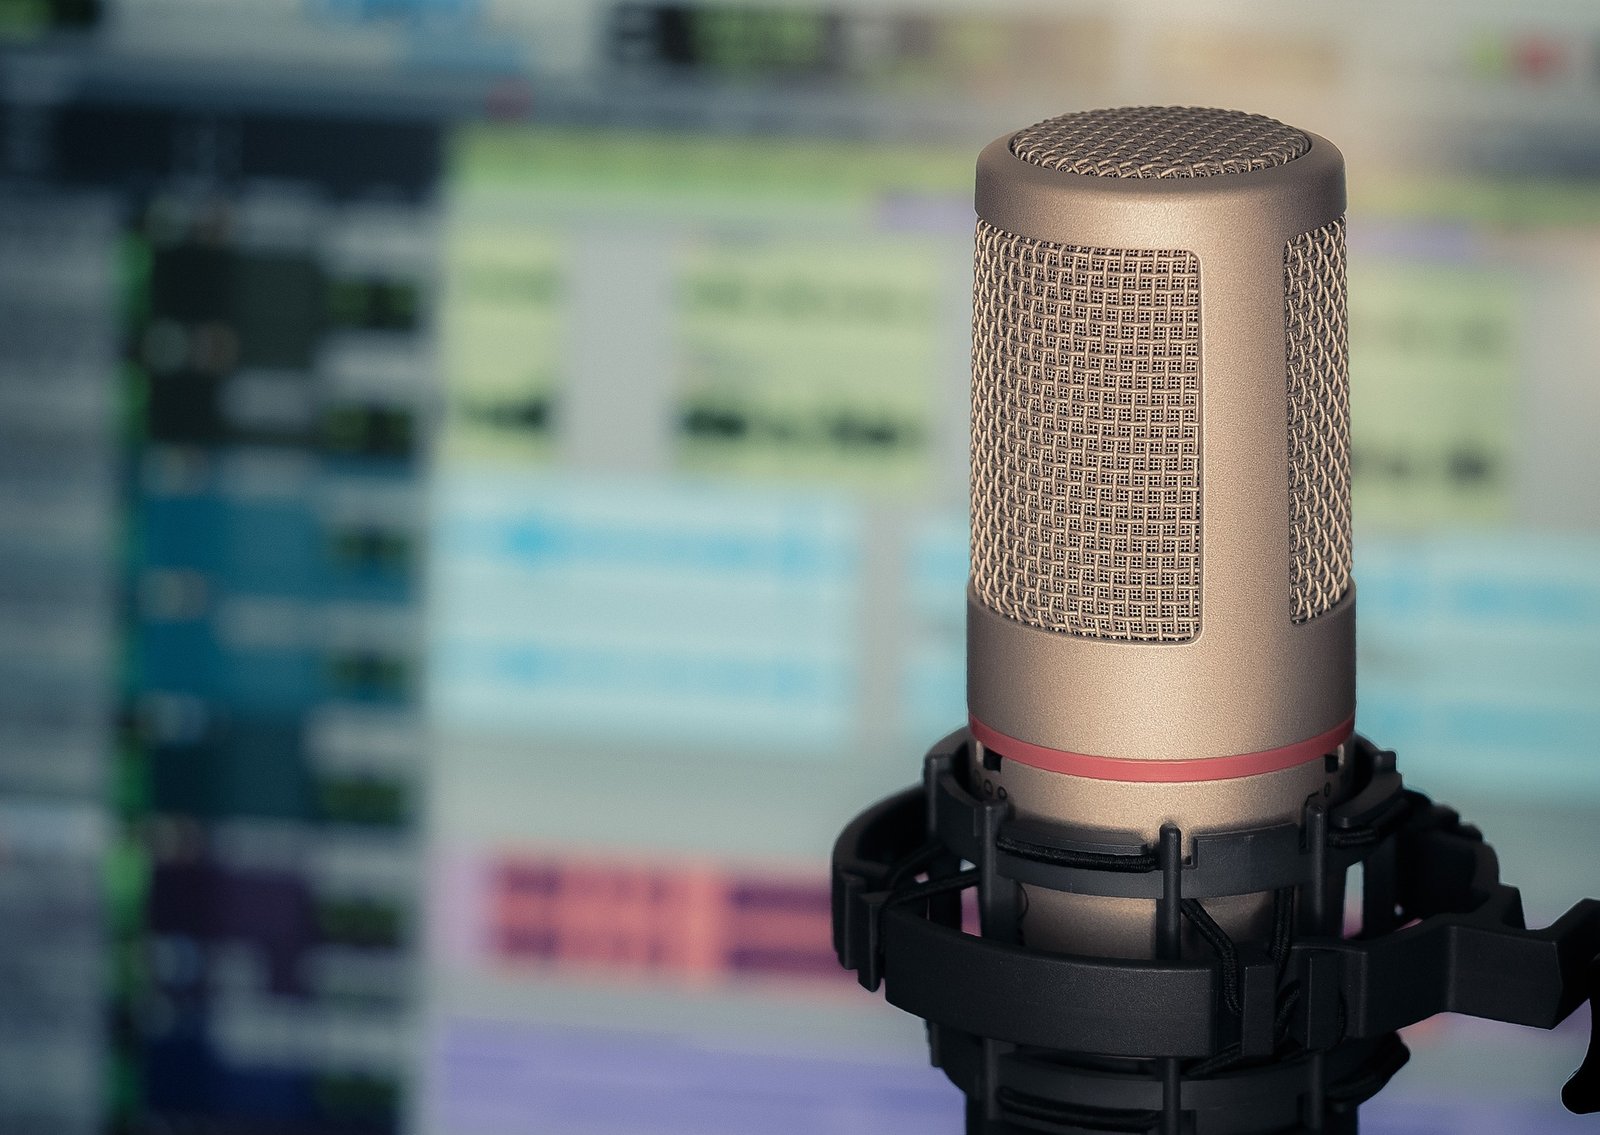 Best podcast hosting site options for free or paid